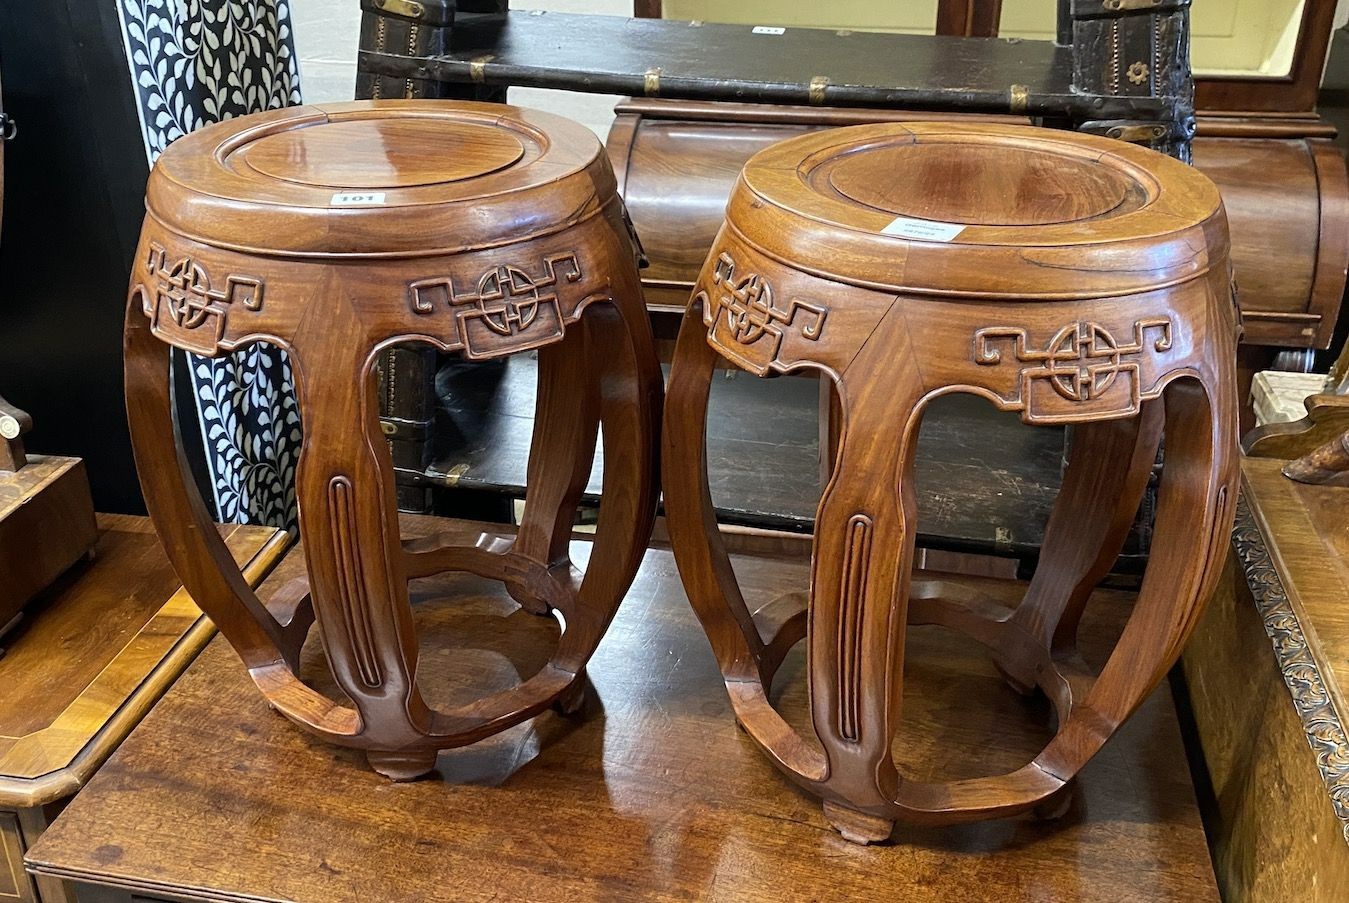 A pair of Chinese carved hardwood vase stands, diameter 36cm, height 47cm